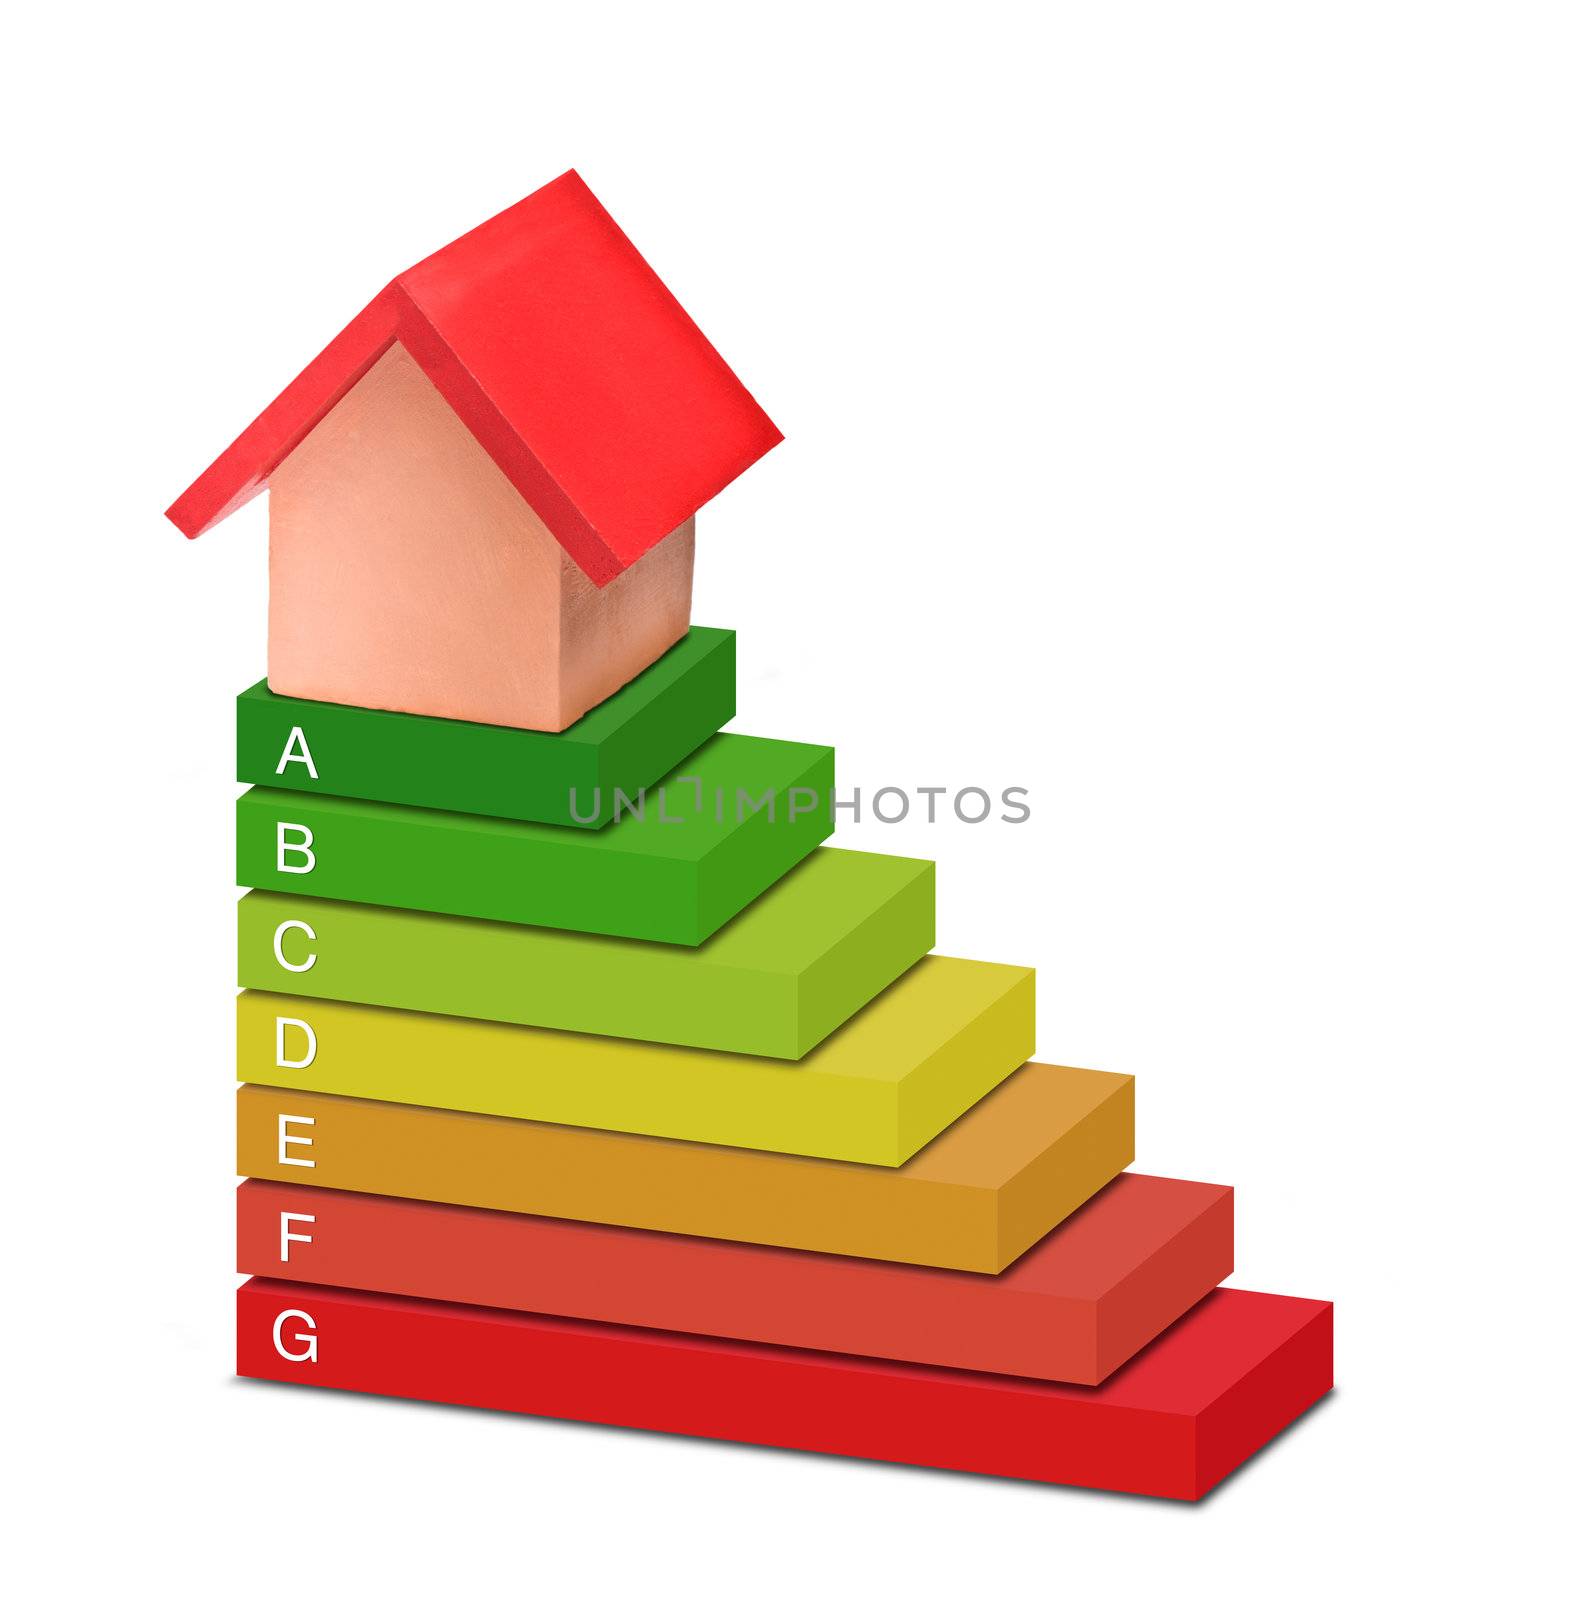 What energy rating can a house achieve over white